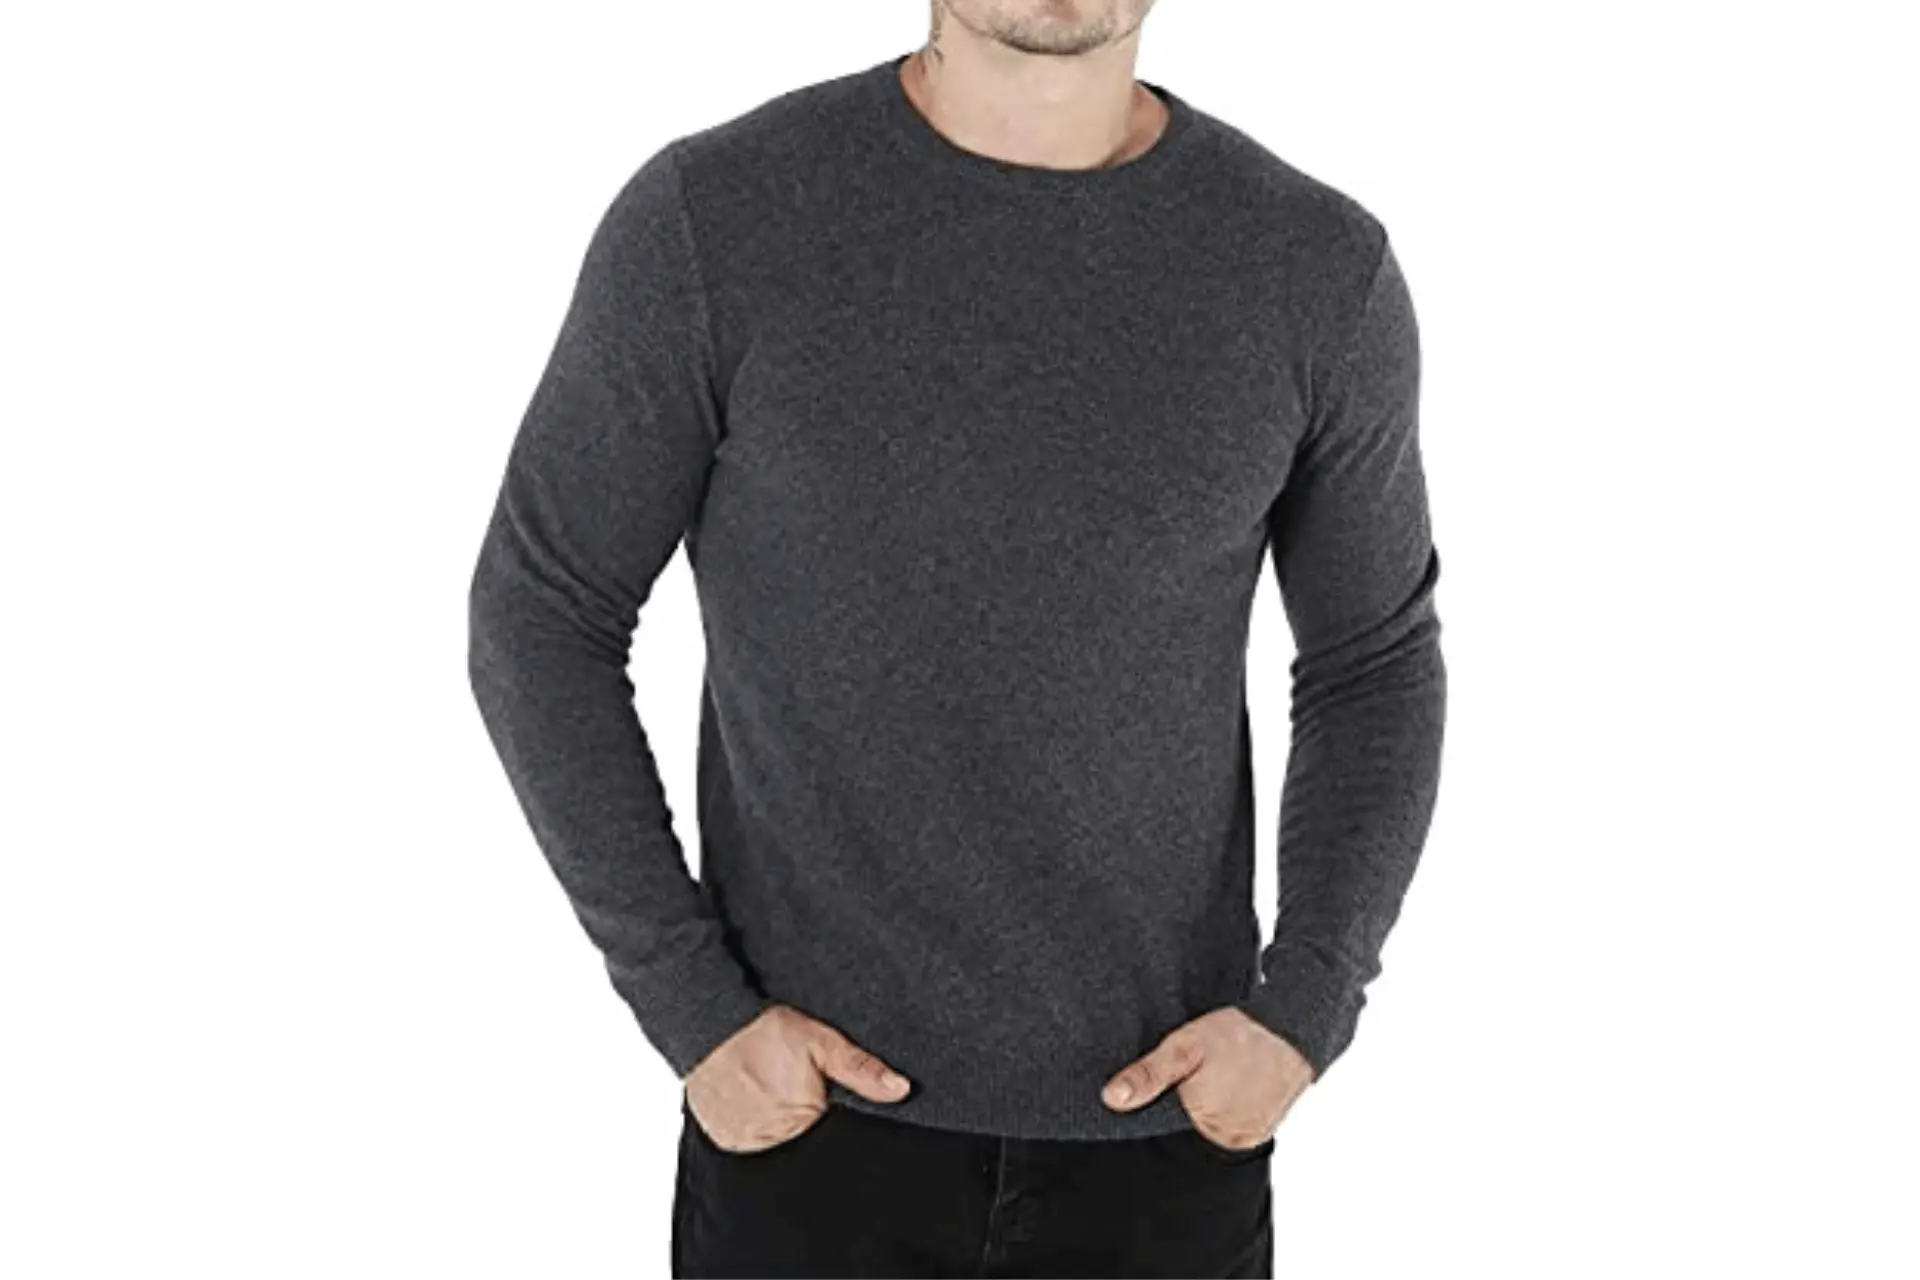 WOSICA Men's 100% Cashmere Pullover with Long Sleeve Crew Neck